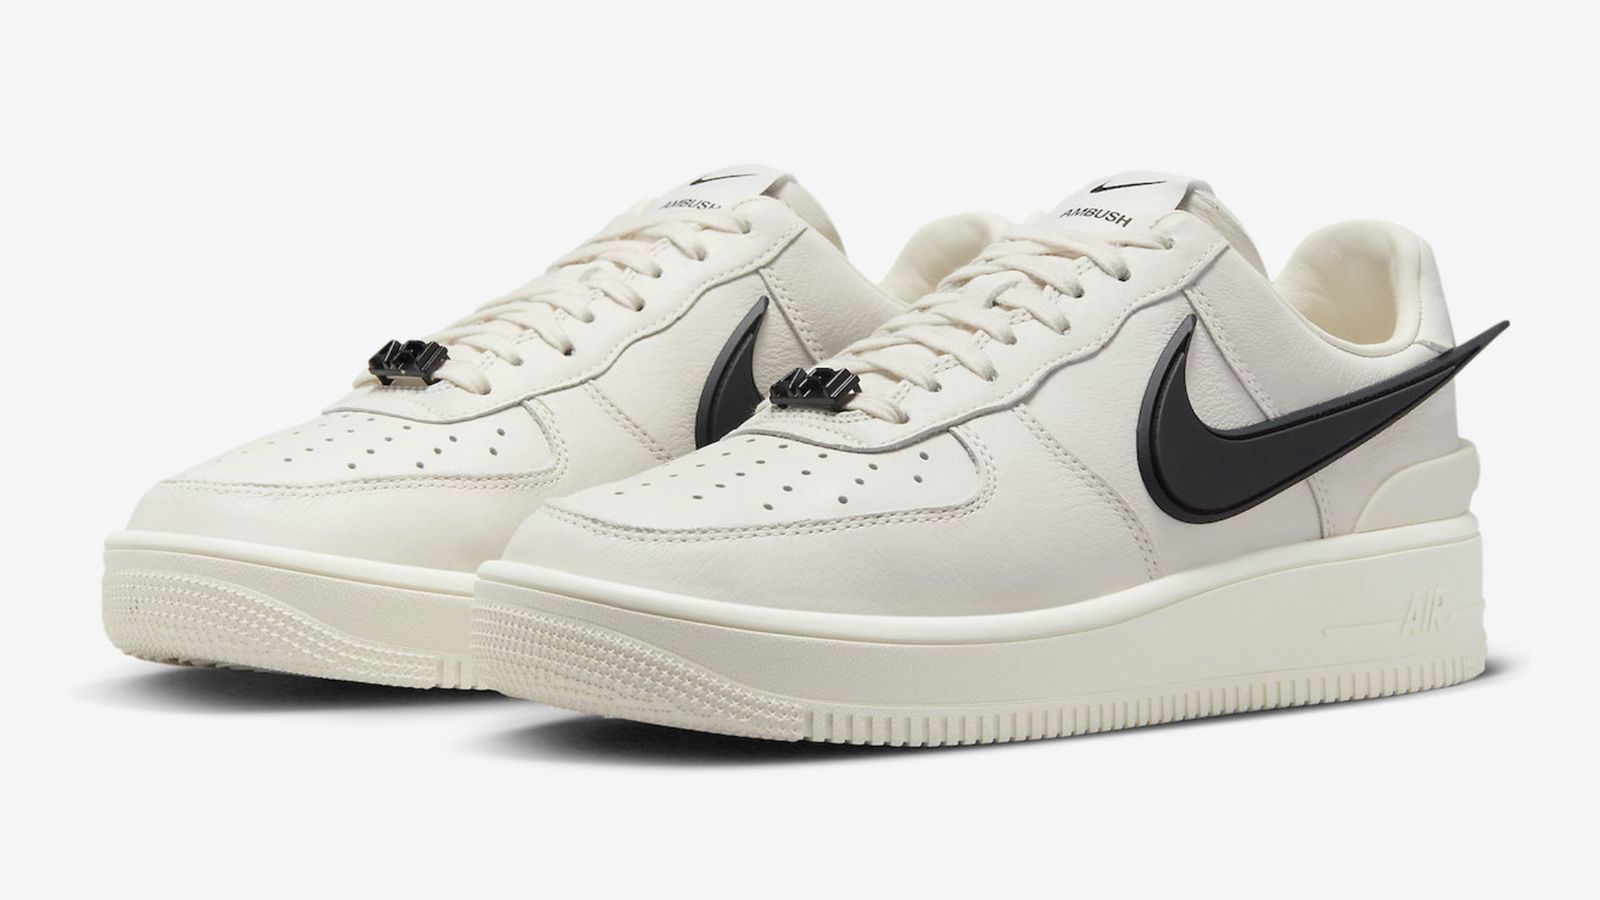 AMBUSH x Nike Air Force 1 Low "White" product image of an off-white pair of Air Force 1s featuring oversized black Nike branding.